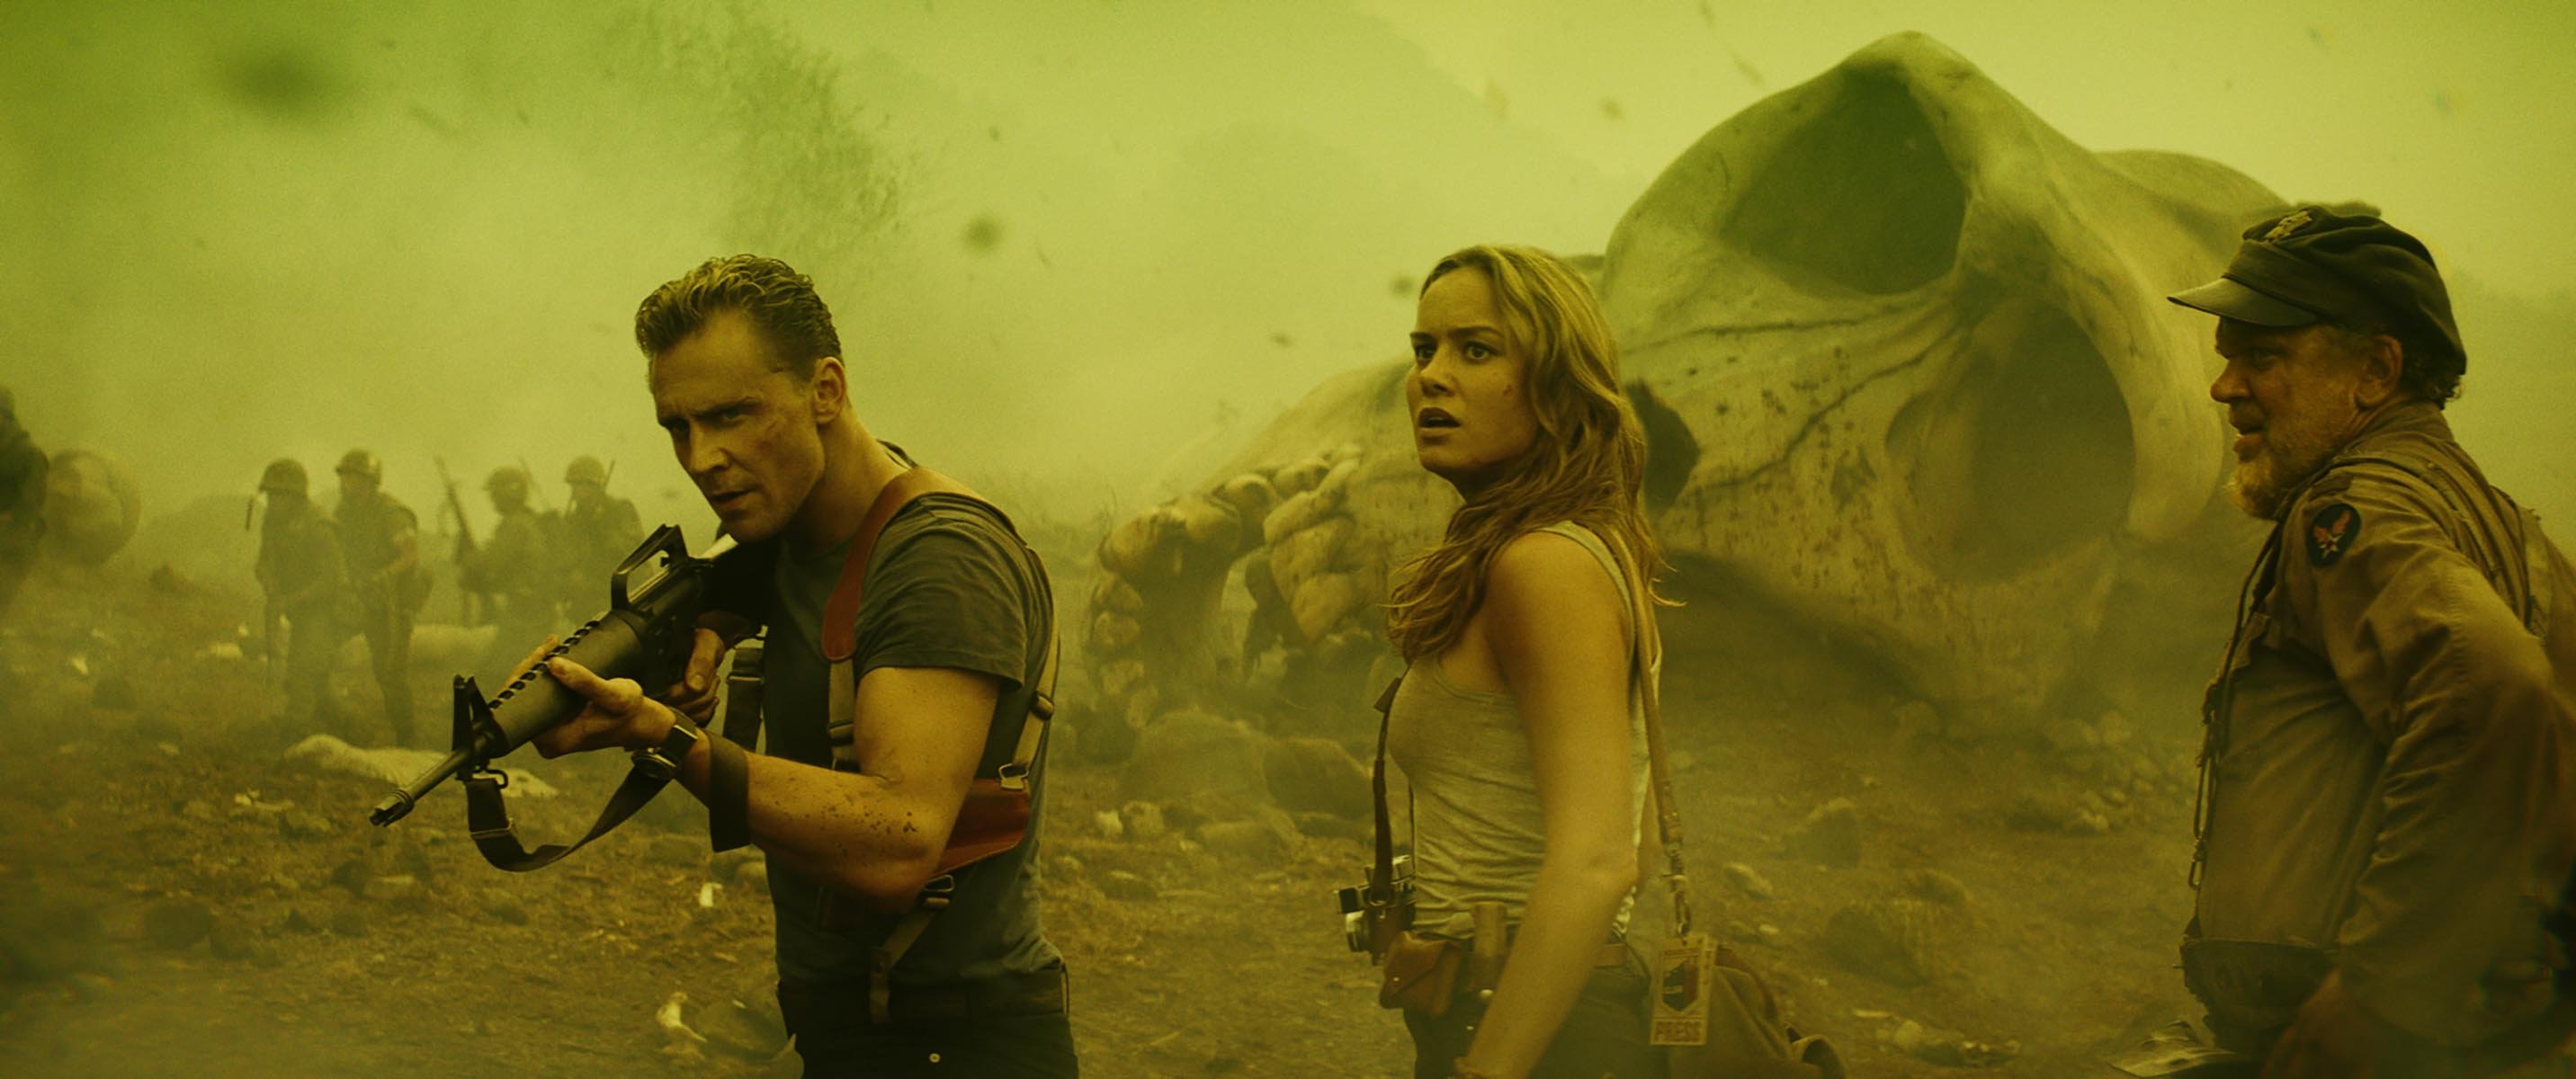 Tom Hiddleston, Brie Larson and John C. Reilly appear in Warner Bros. Pictures, Legendary Pictures and Tencent Pictures' action adventure "Kong: Skull Island"